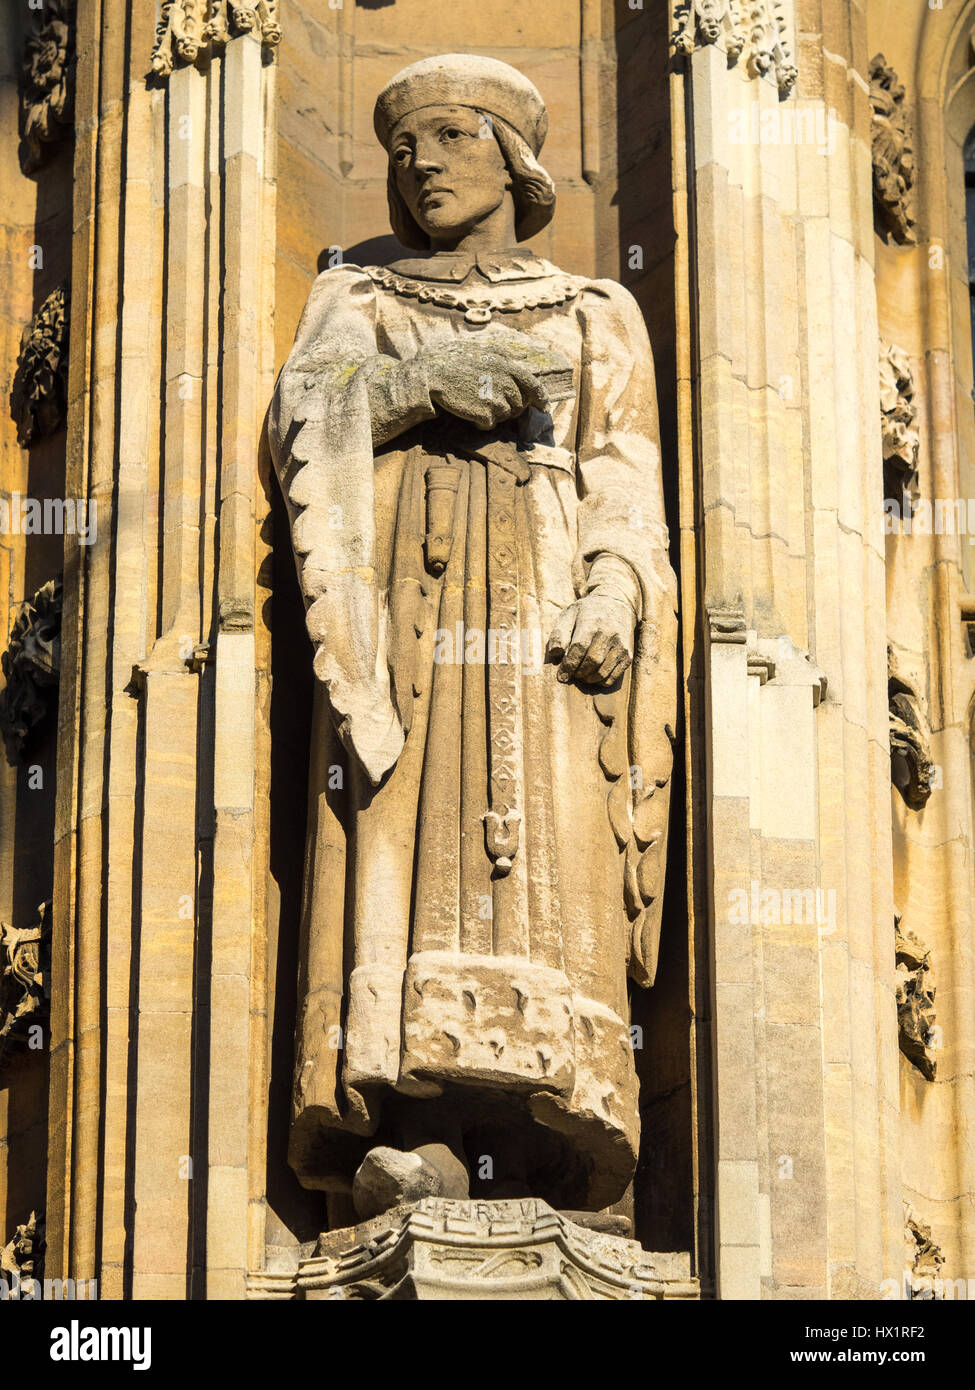 Statue of King Henry VI on the gatehouse of the old Schools building, part of the University of Cambridge. Henry VI founded Kings College in 1441. Stock Photo